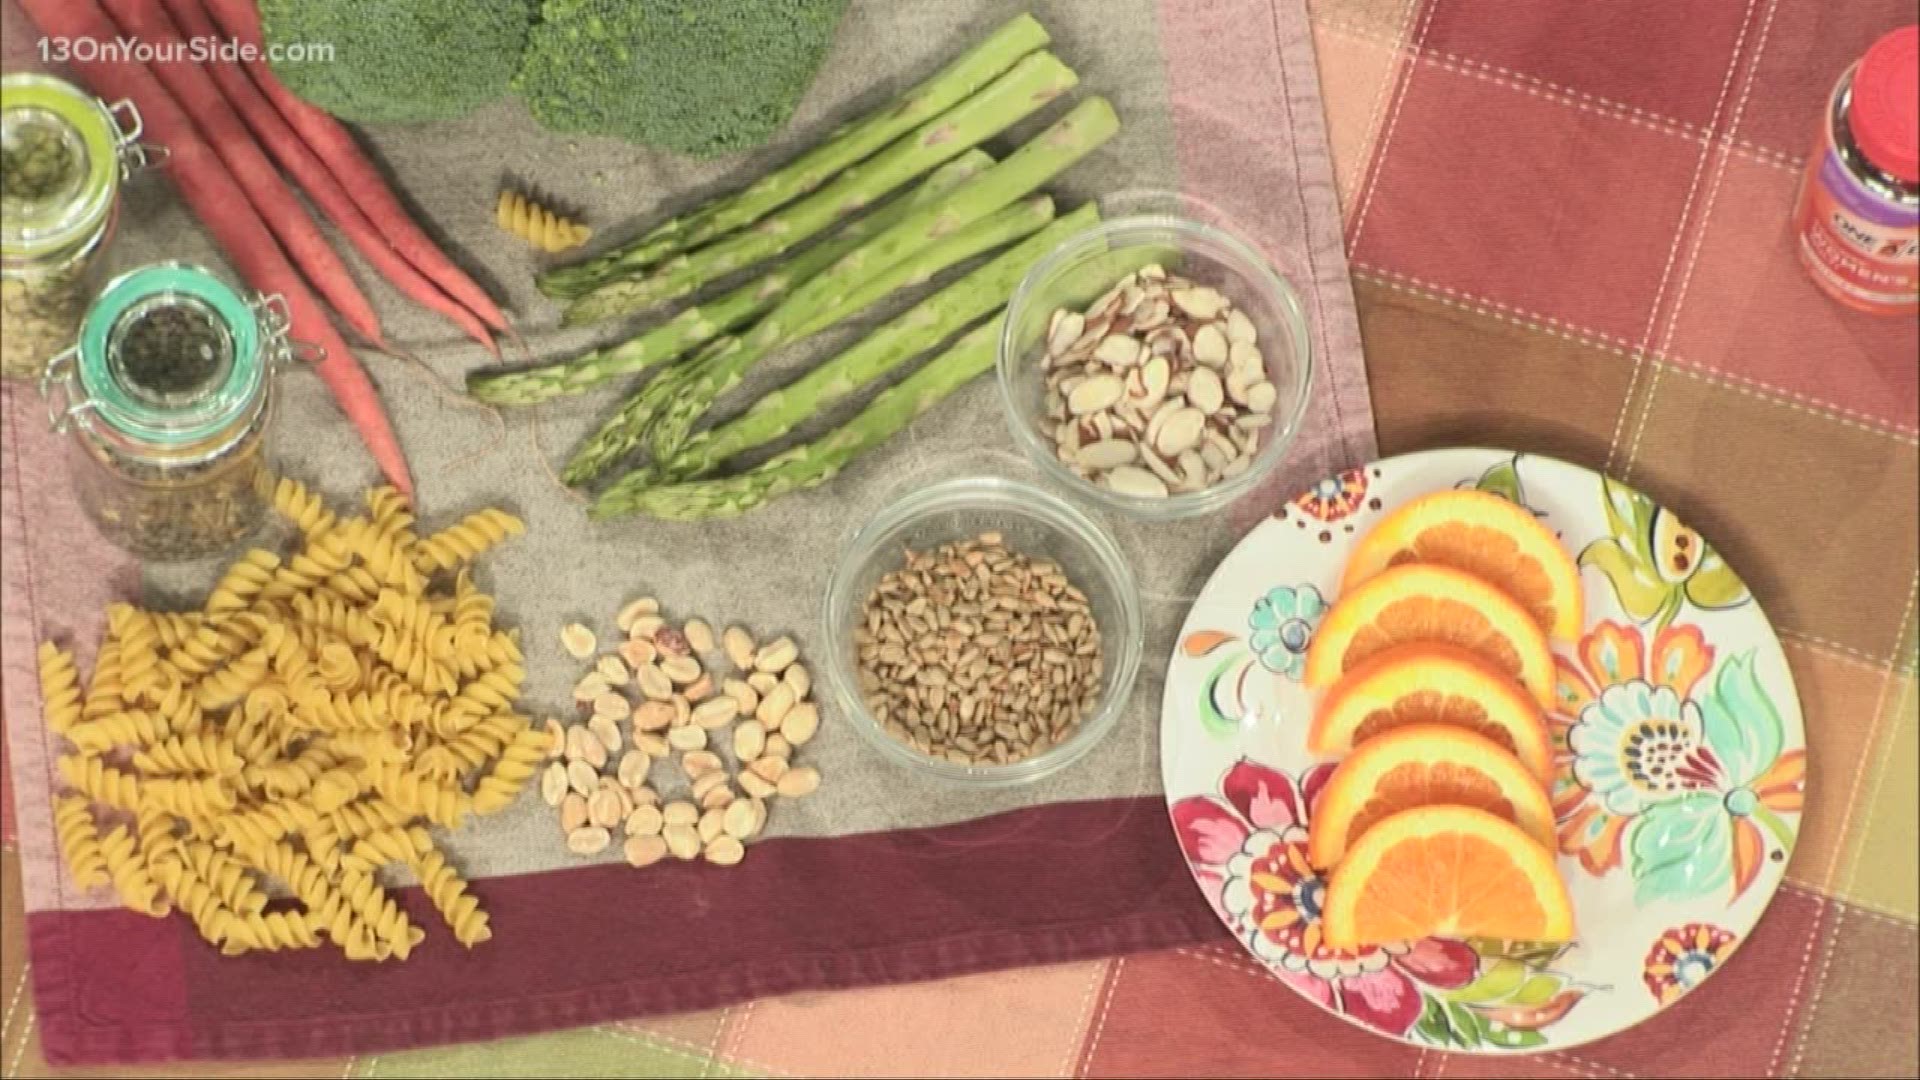 Today's On the Menu segment is about Folate, a protective micronutrient.